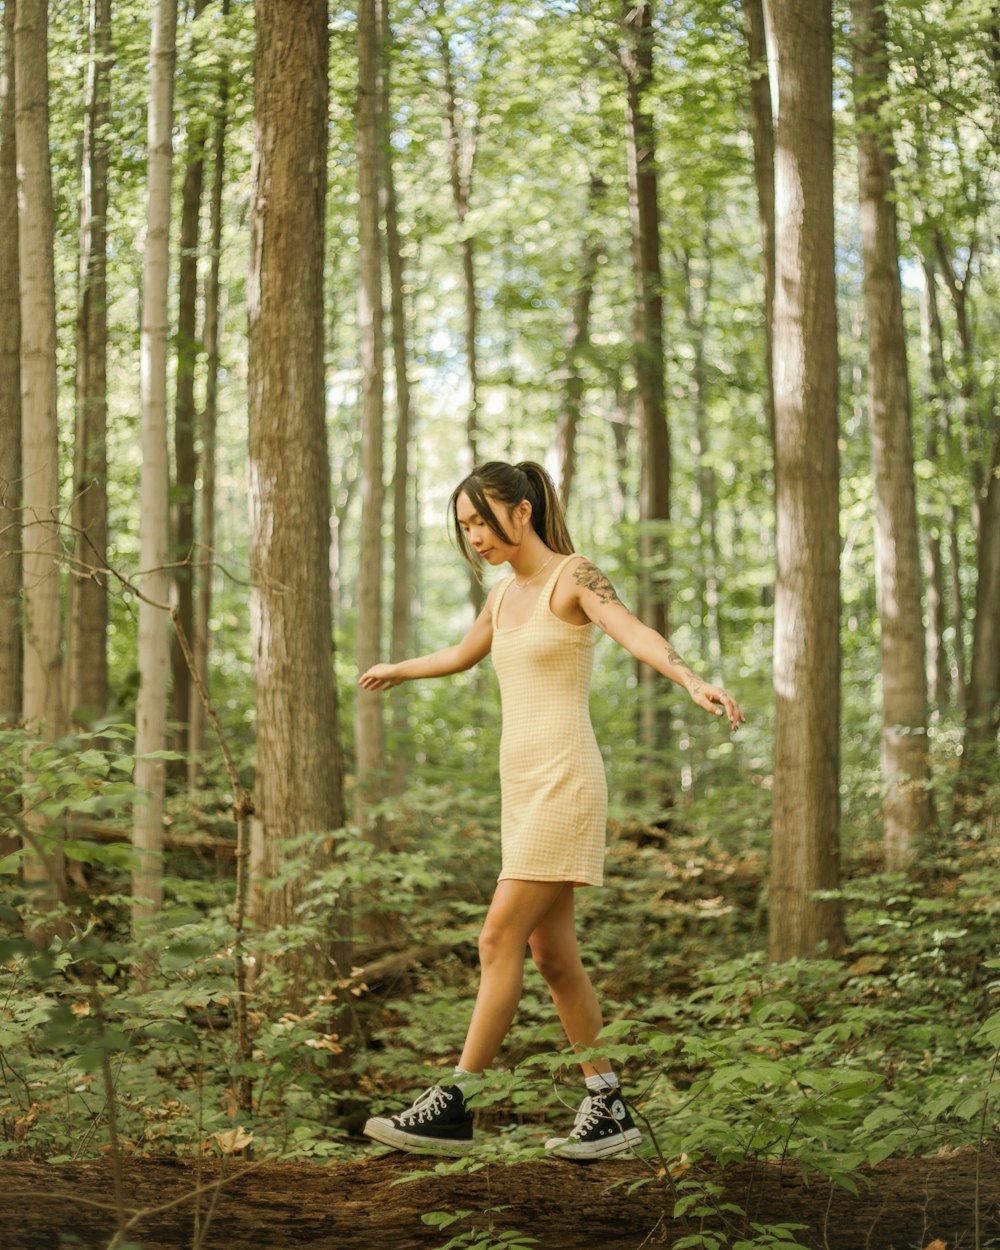 a woman in a yellow dress walking through a forest